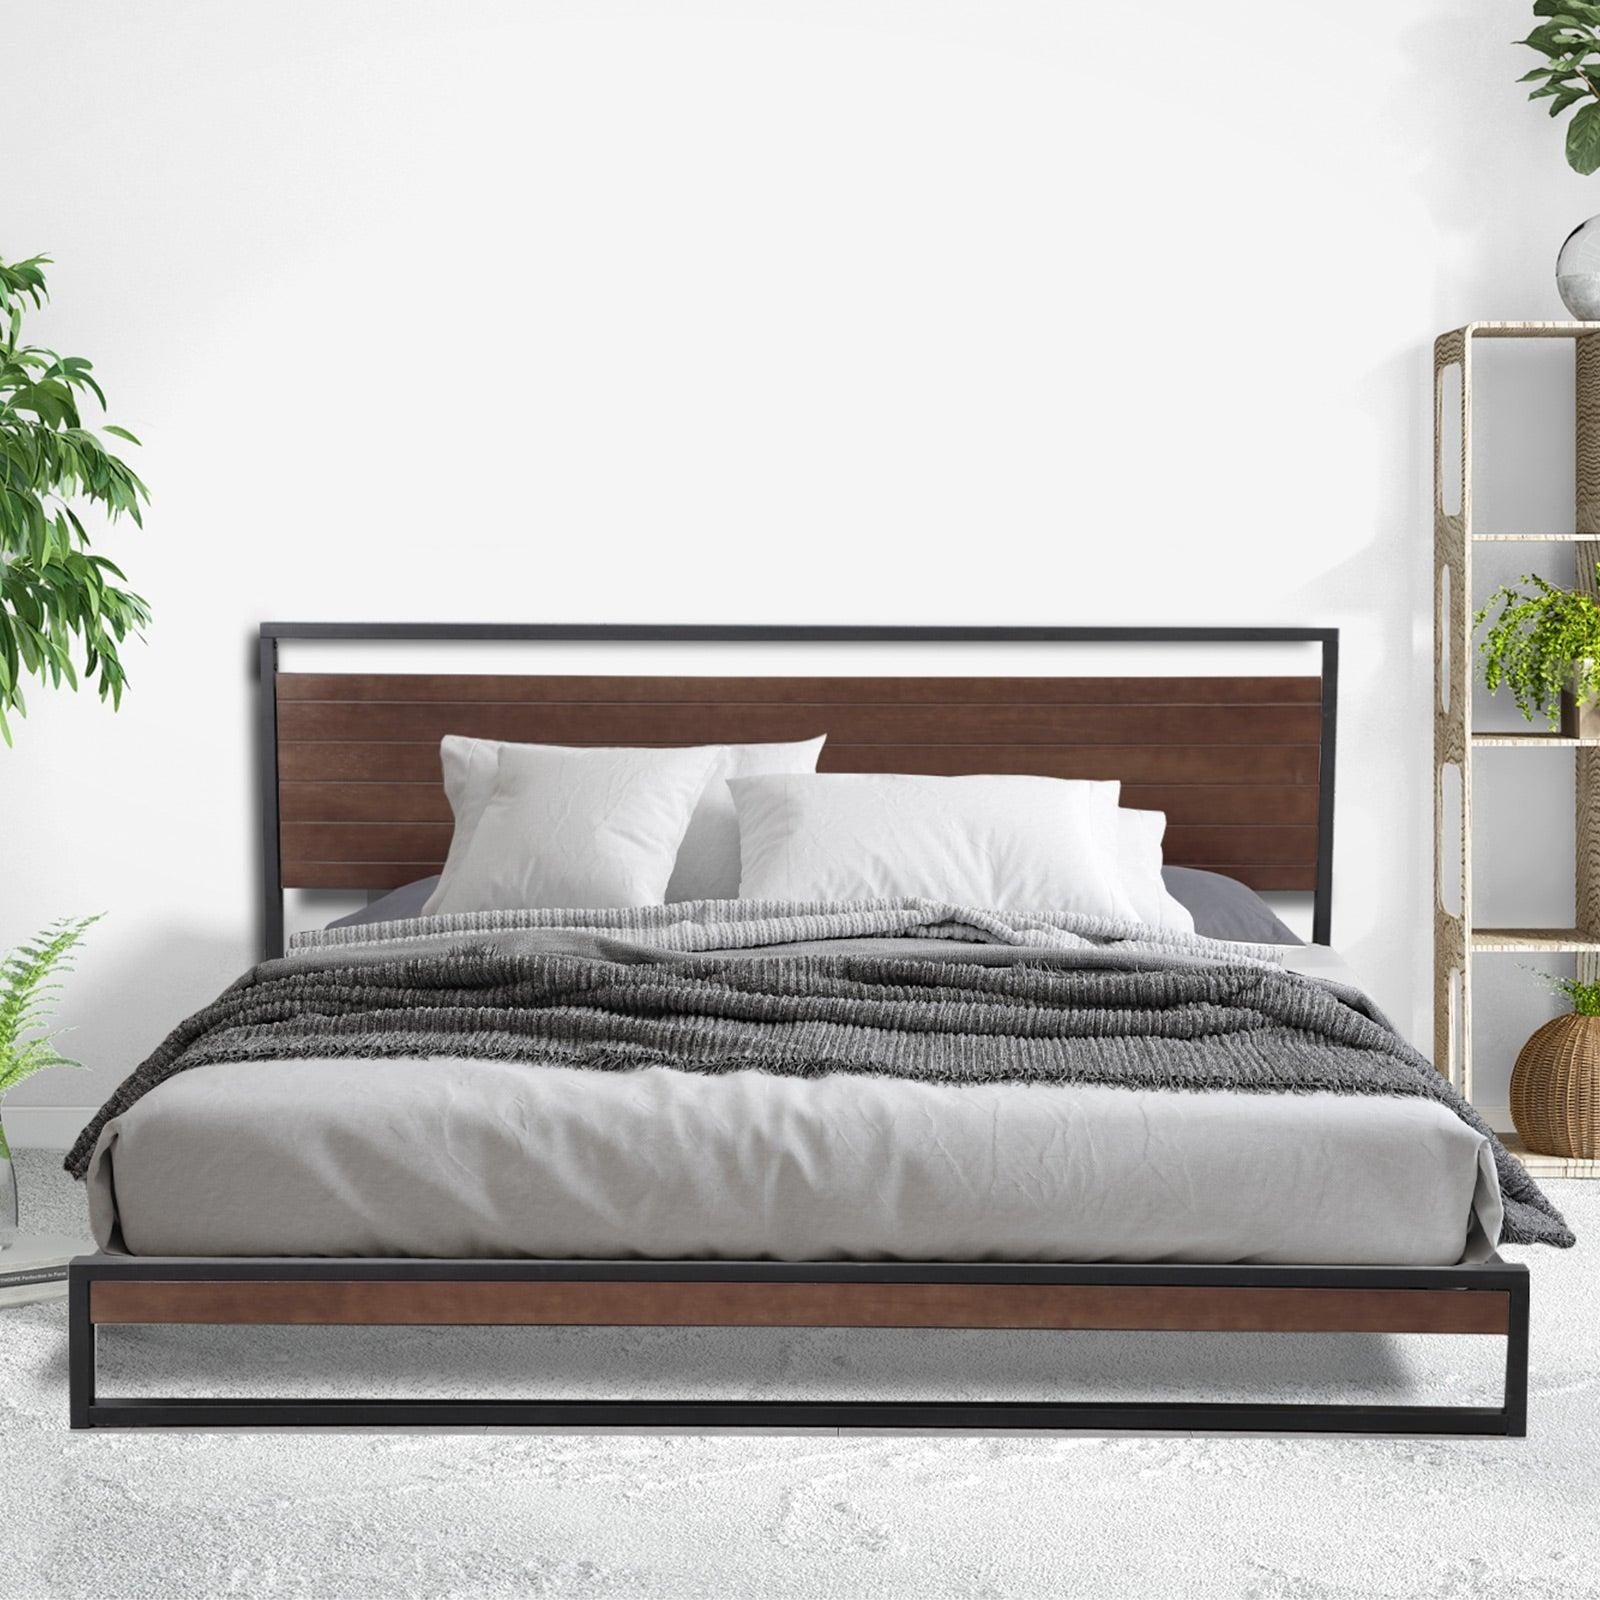 Azure Wood Bed Frame With Comforpedic Mattress Package Deal Bedroom Set White, Brown King Deals499